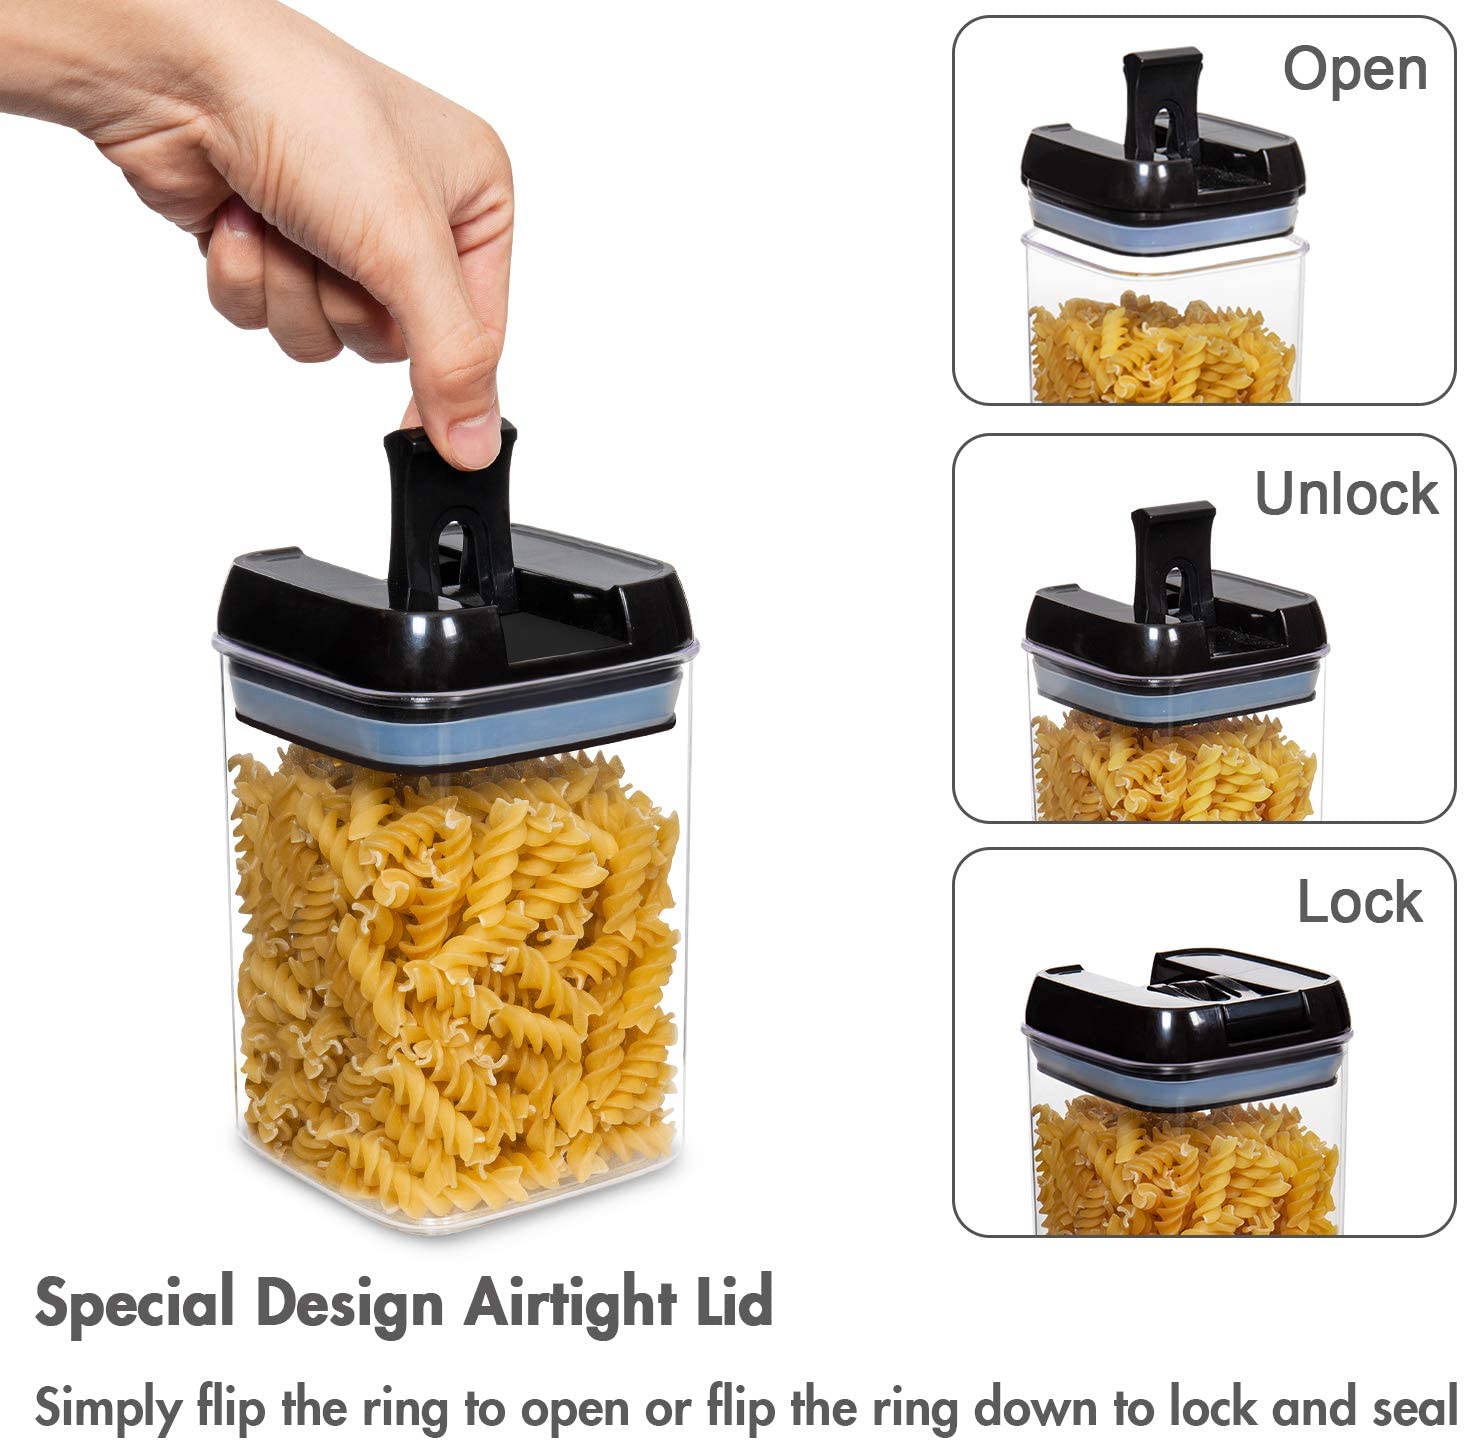 Airtight Food Storage Containers with Lids, 24 pcs Plastic Kitchen